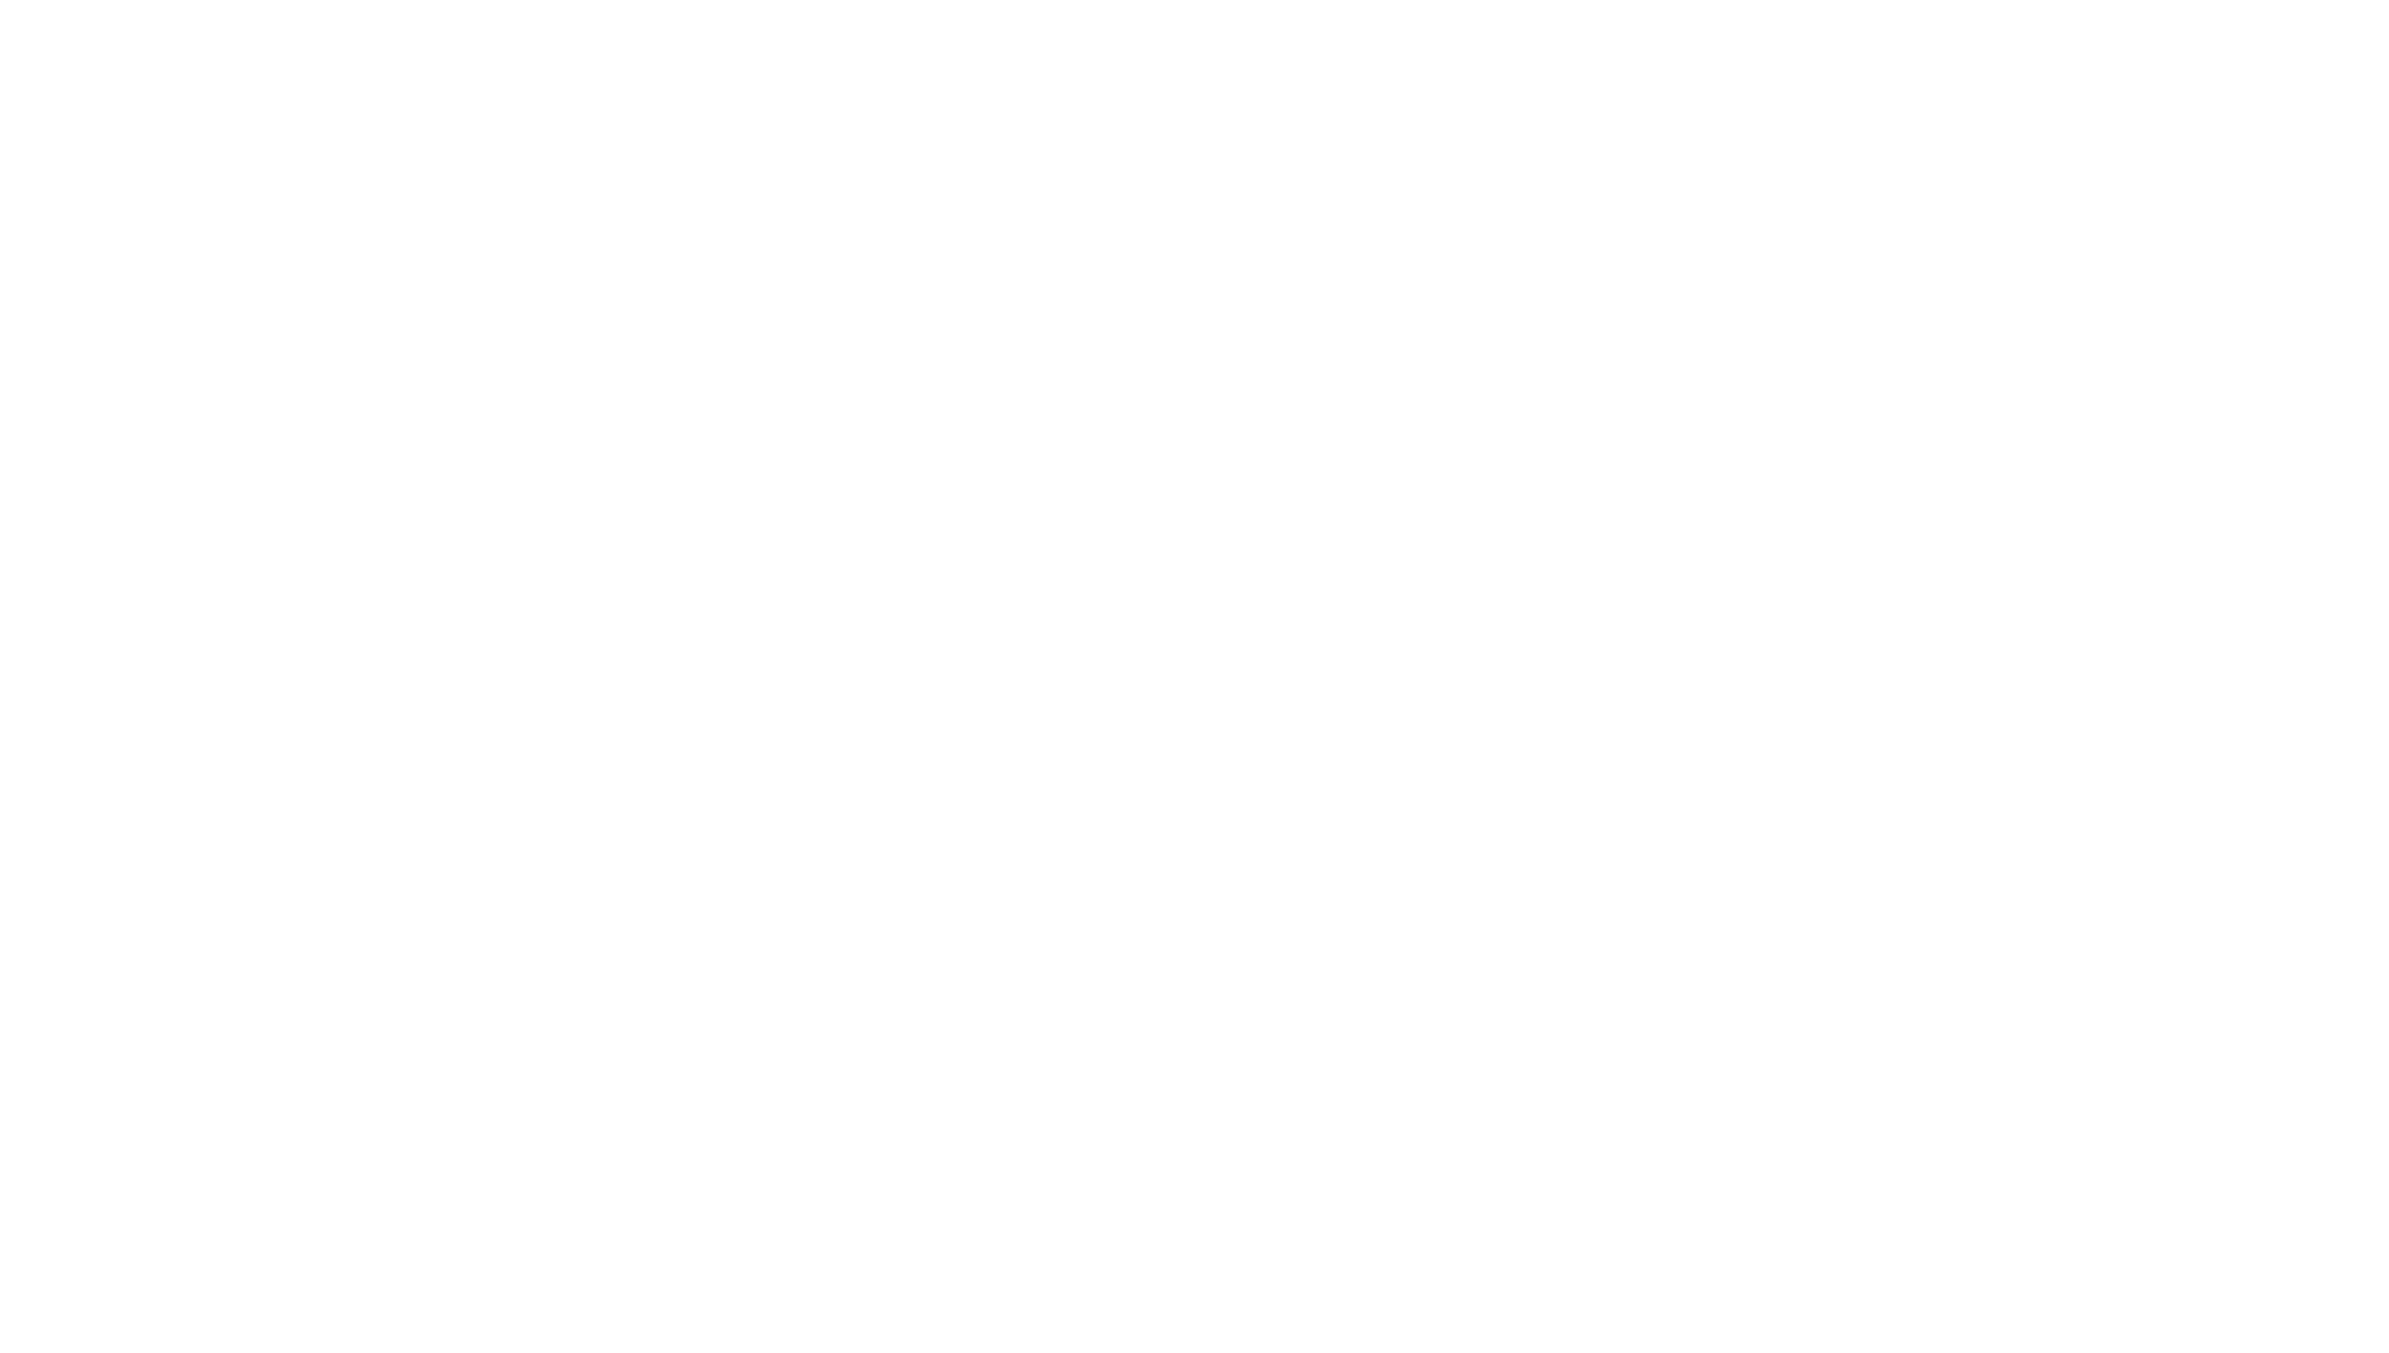 Sammy_Ozzies_ProductionDesign_Laurel.png